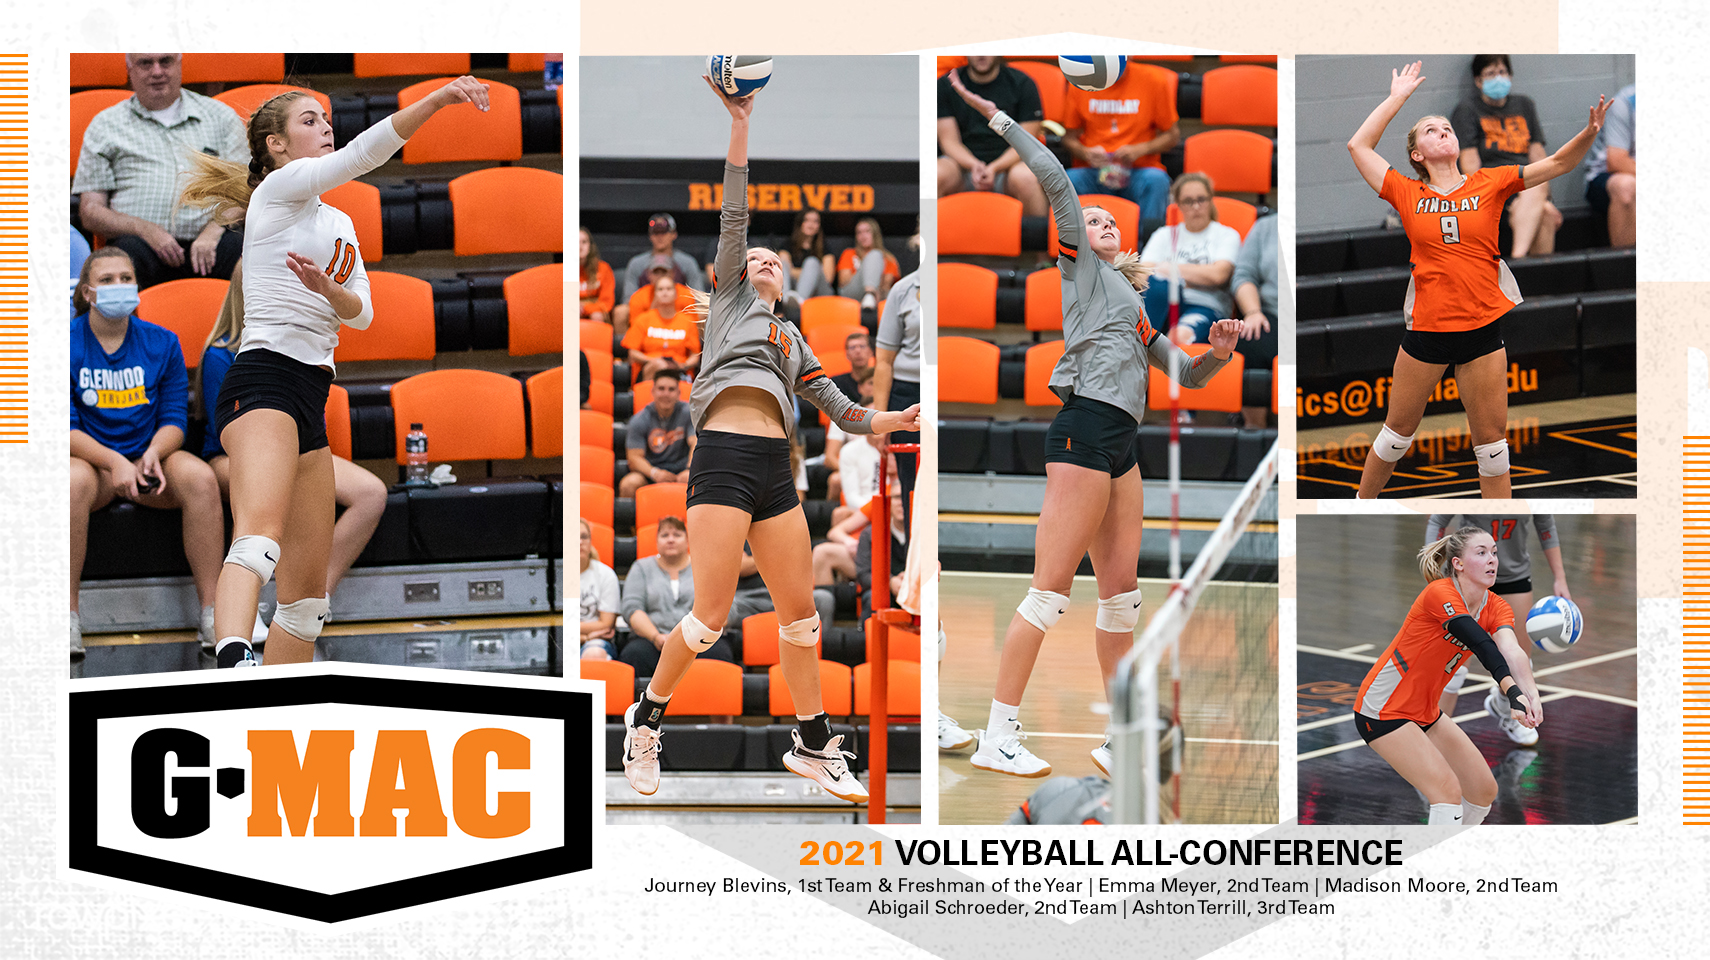 2021 women's volleyball all-conference team